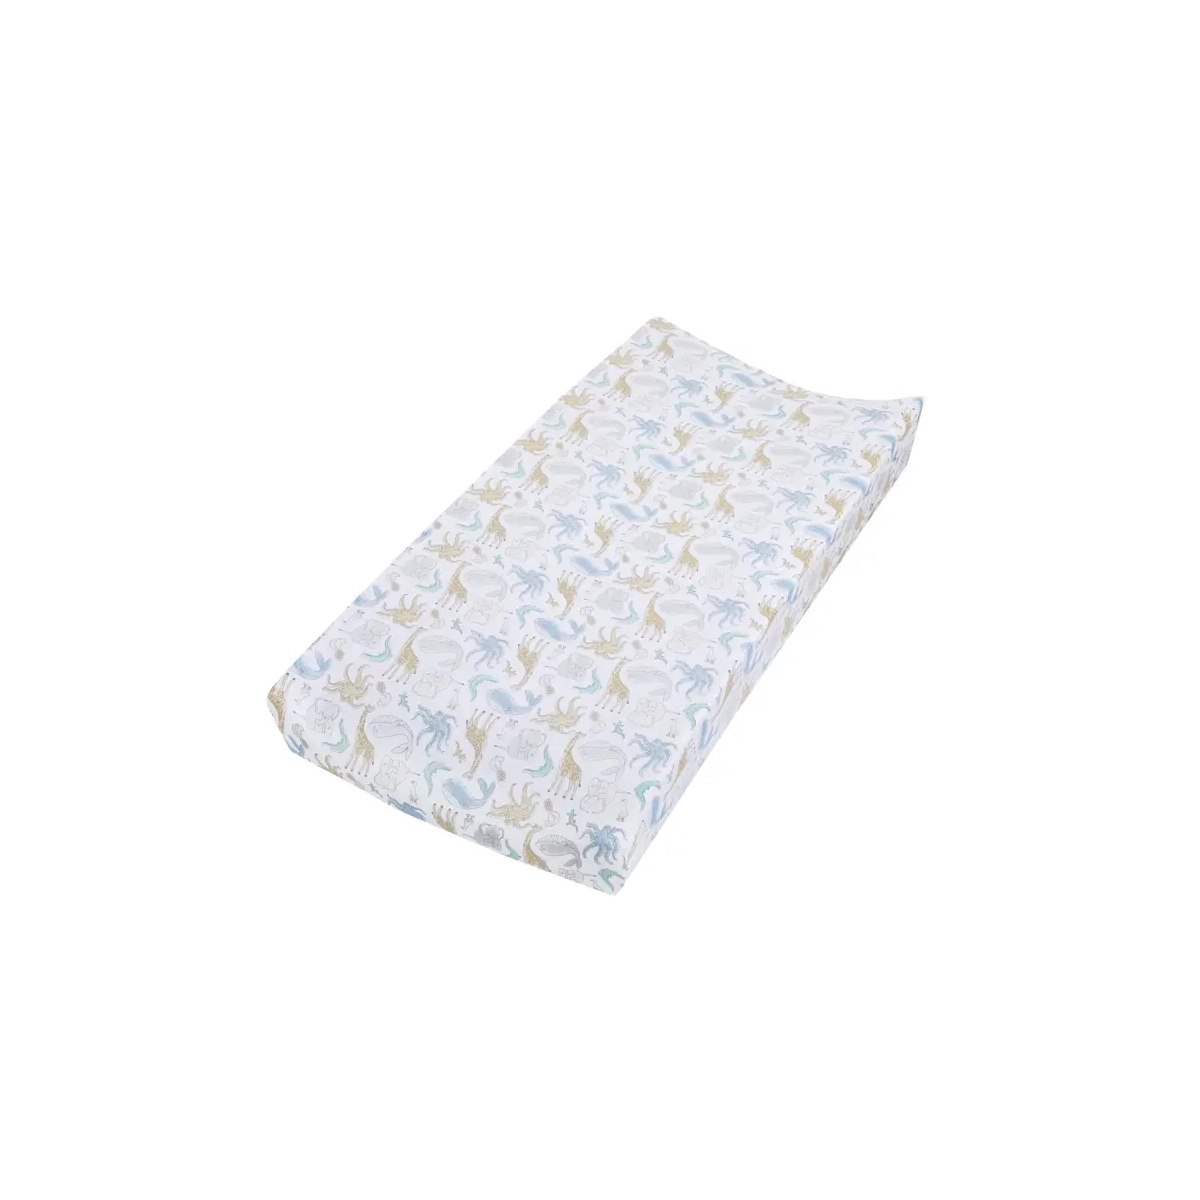 Image of Aden + Anais Essentials Cotton Muslin Changing Mat Cover - Natural History (23-19-377)